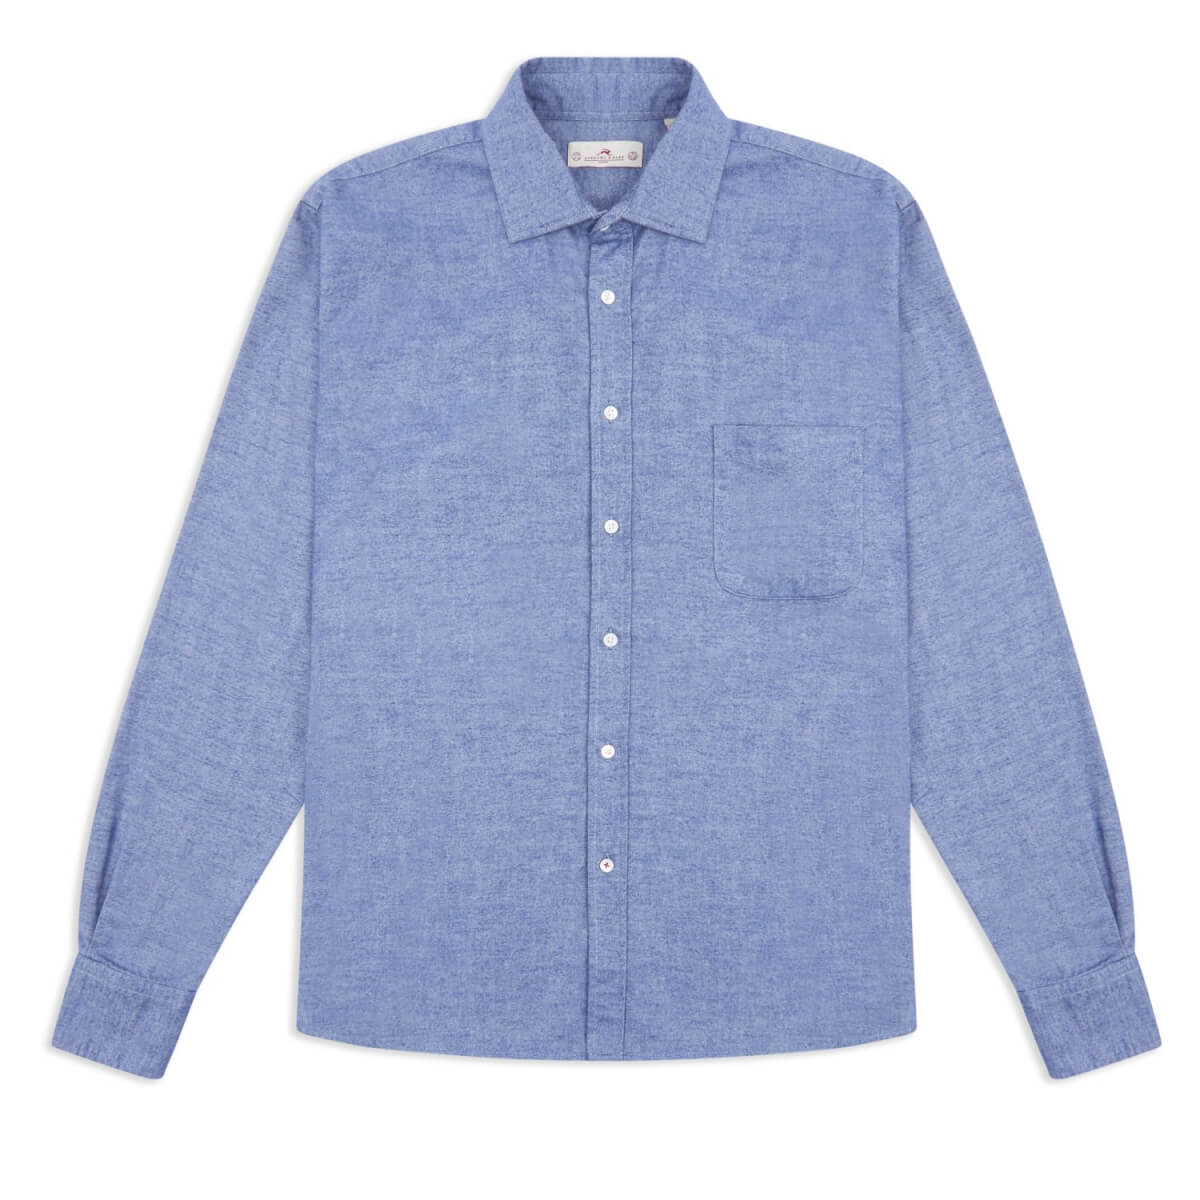 Men's Blue Flannel Shirt - Chambray Extra Large Burrows & Hare